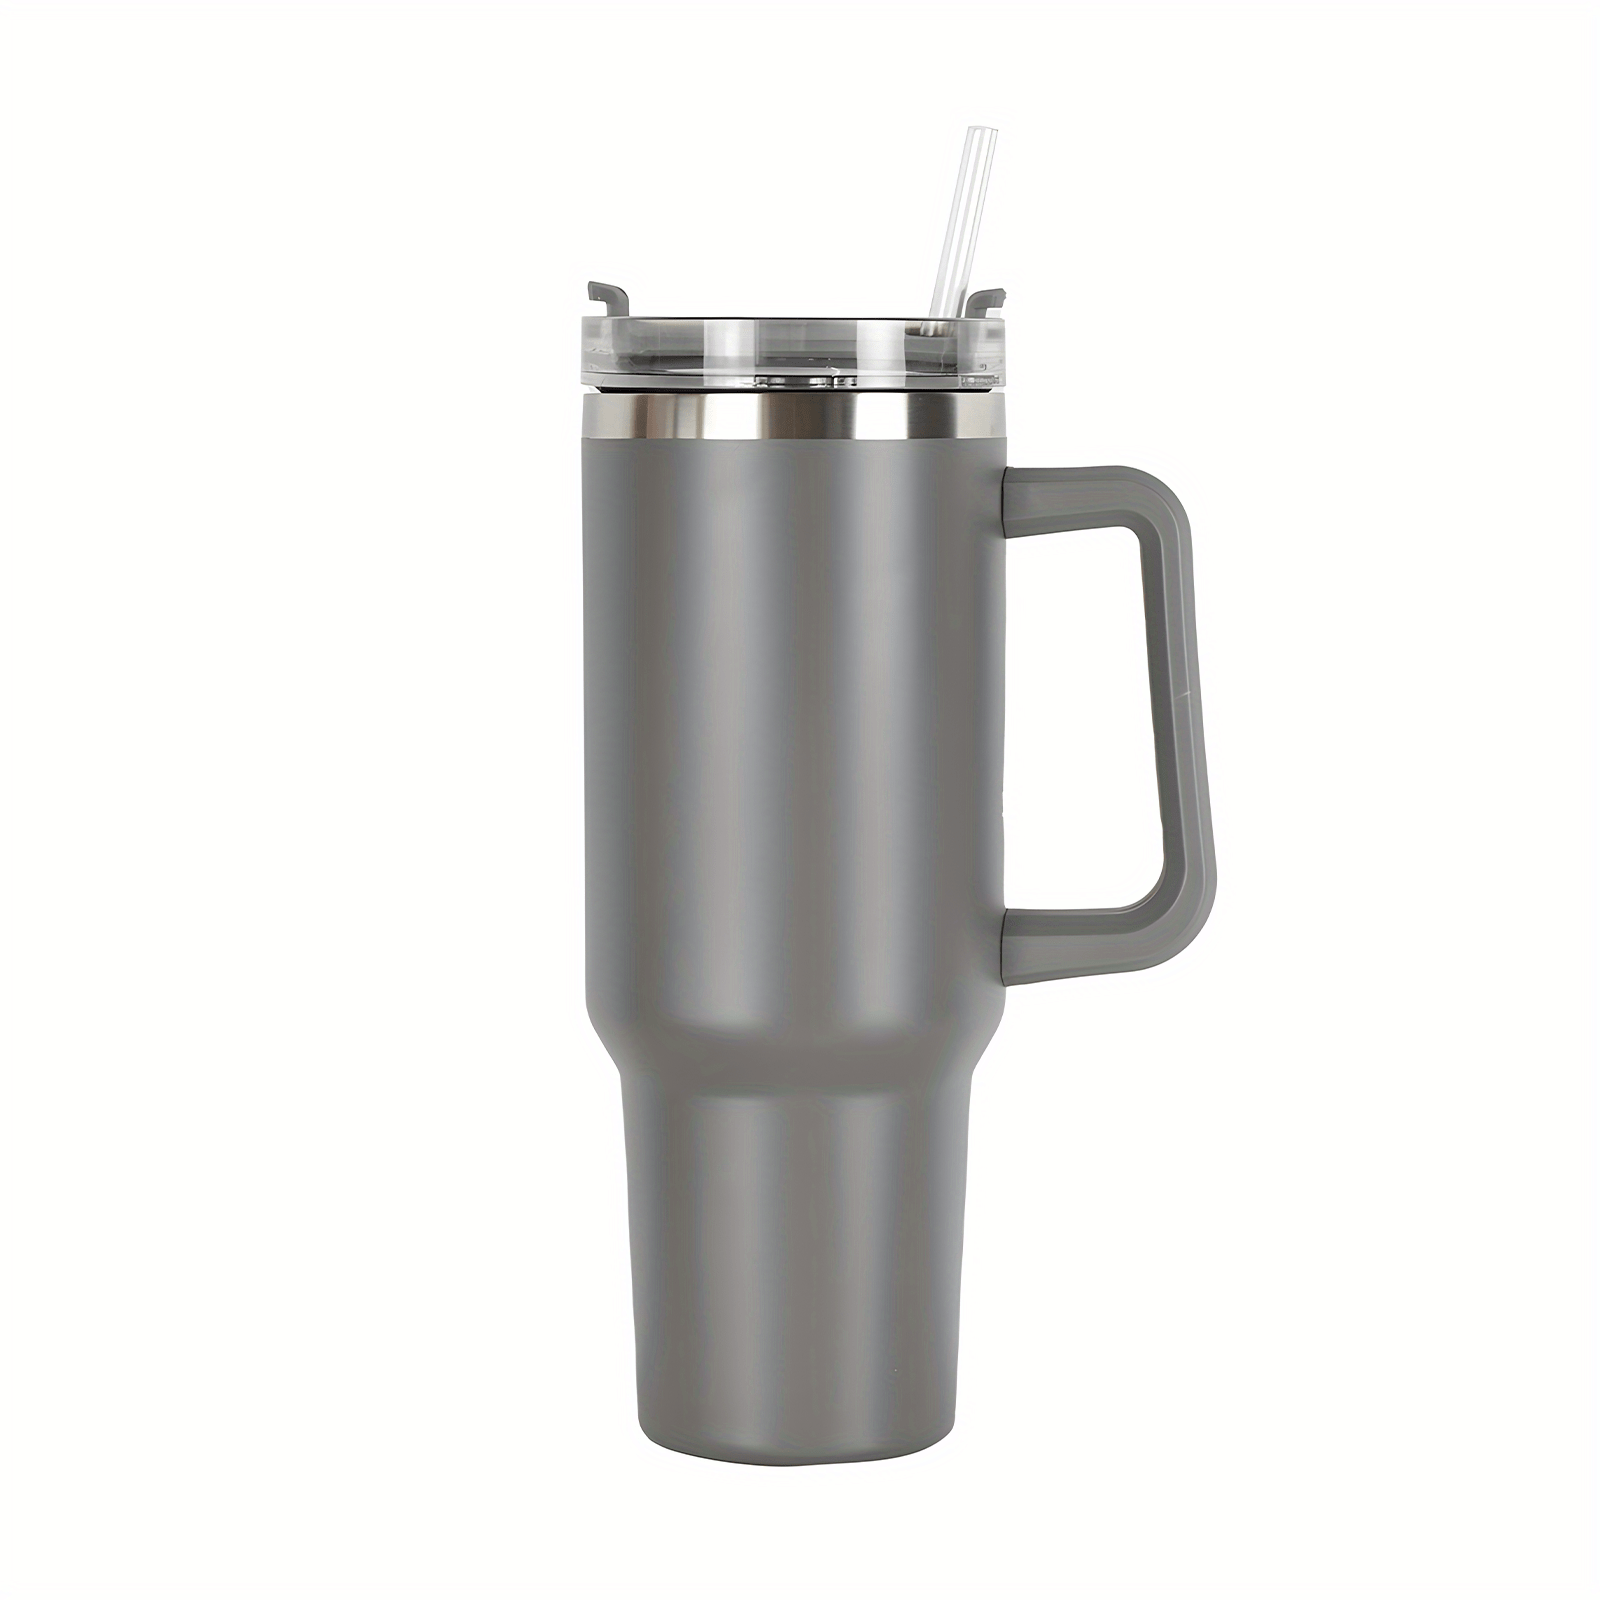 Car Tumbler Cup Tumbler with Handle 40oz Leak Resistant Lid Sealed  Stainless Steel Cup Water Bottle for Water Hot and Cold light grey